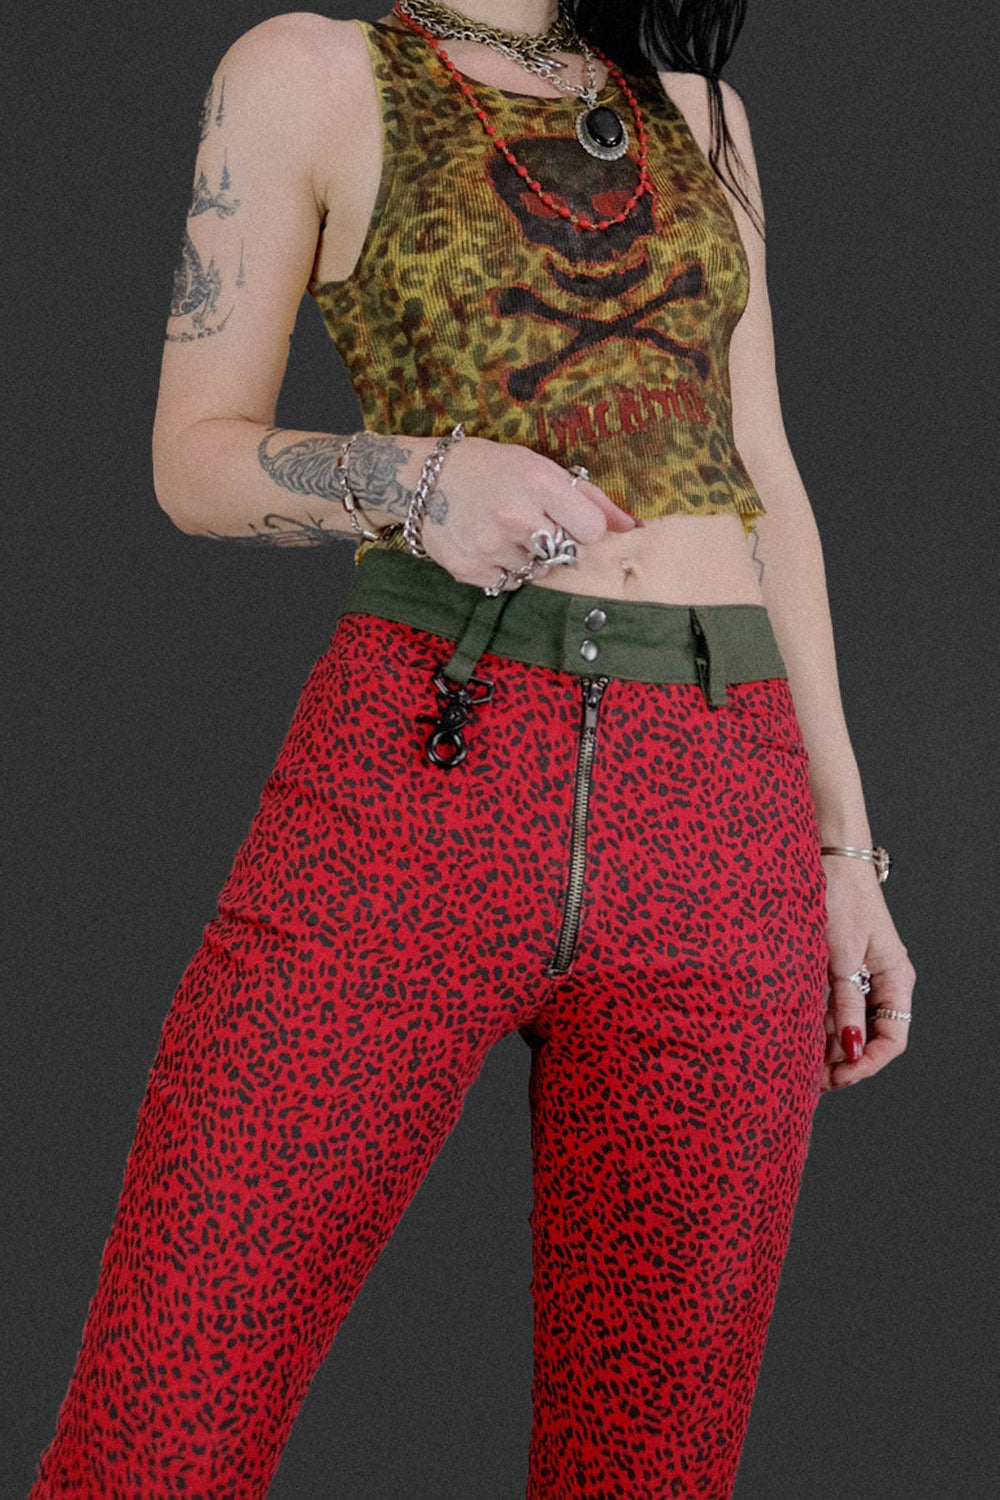 IN STOCK Trainspotting Pants: Red Army Leopard | Size 25